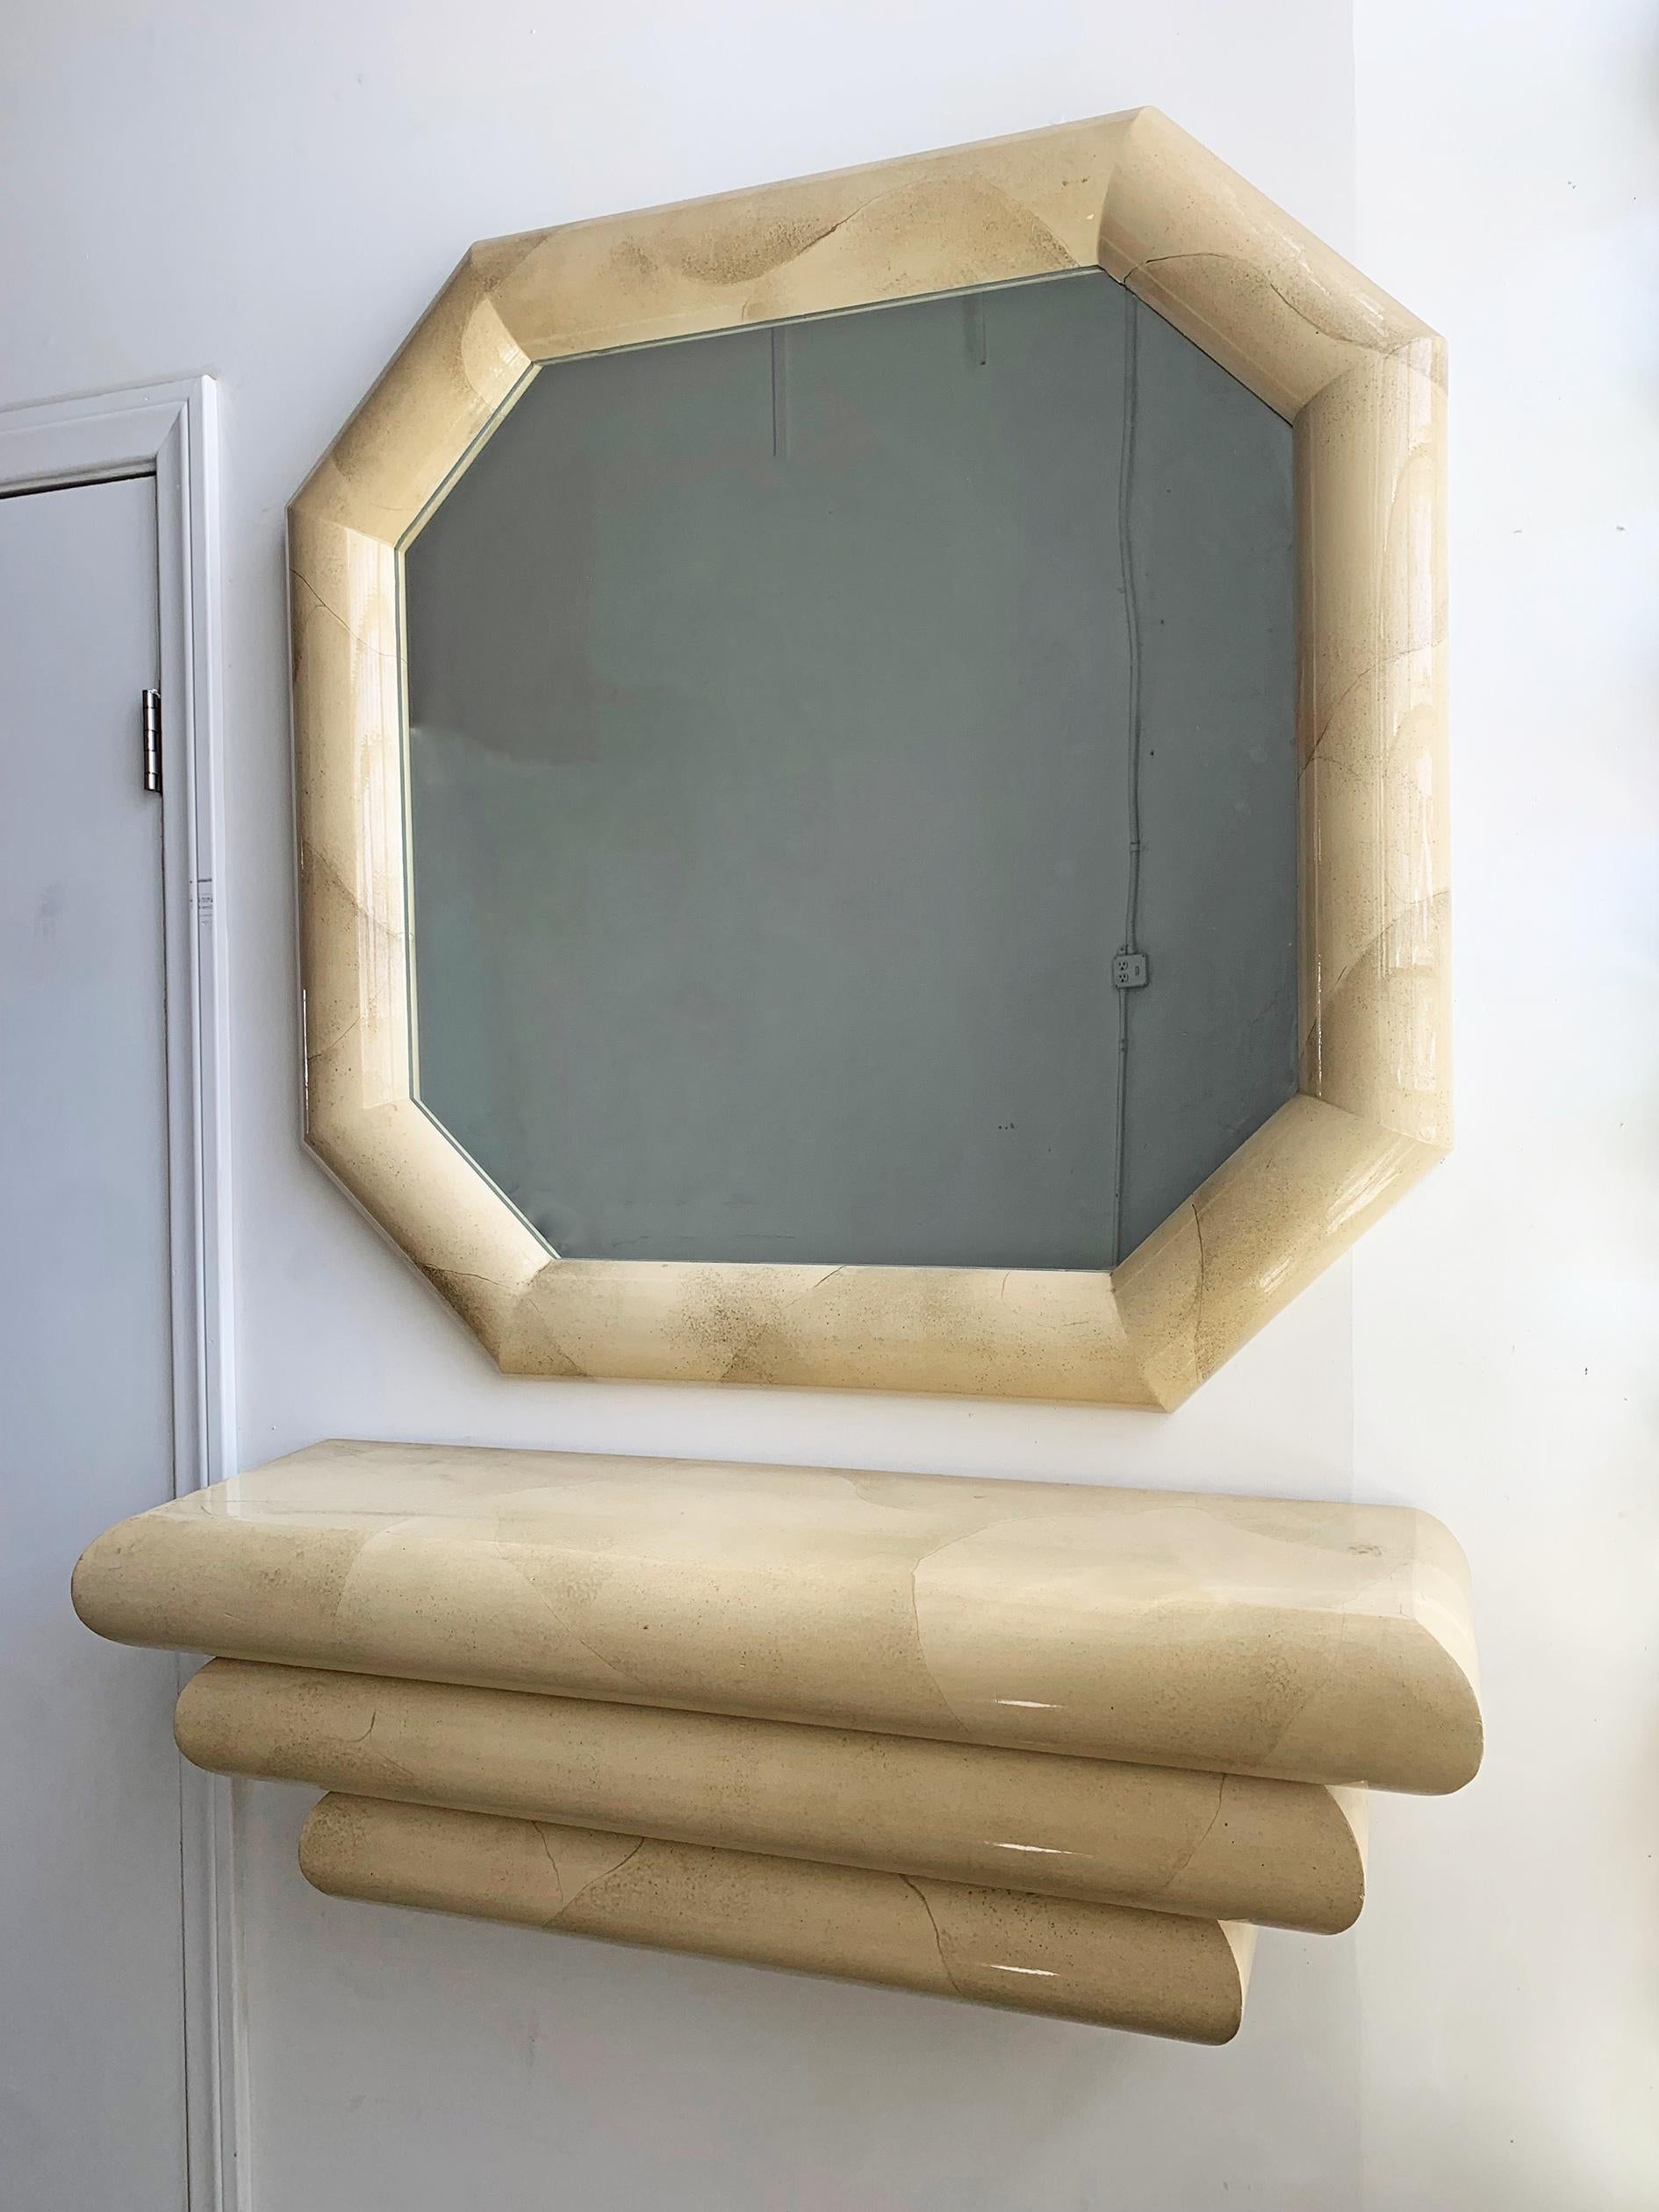 This 1980s mirror and matching console are simply stunning. The mirror bears a 